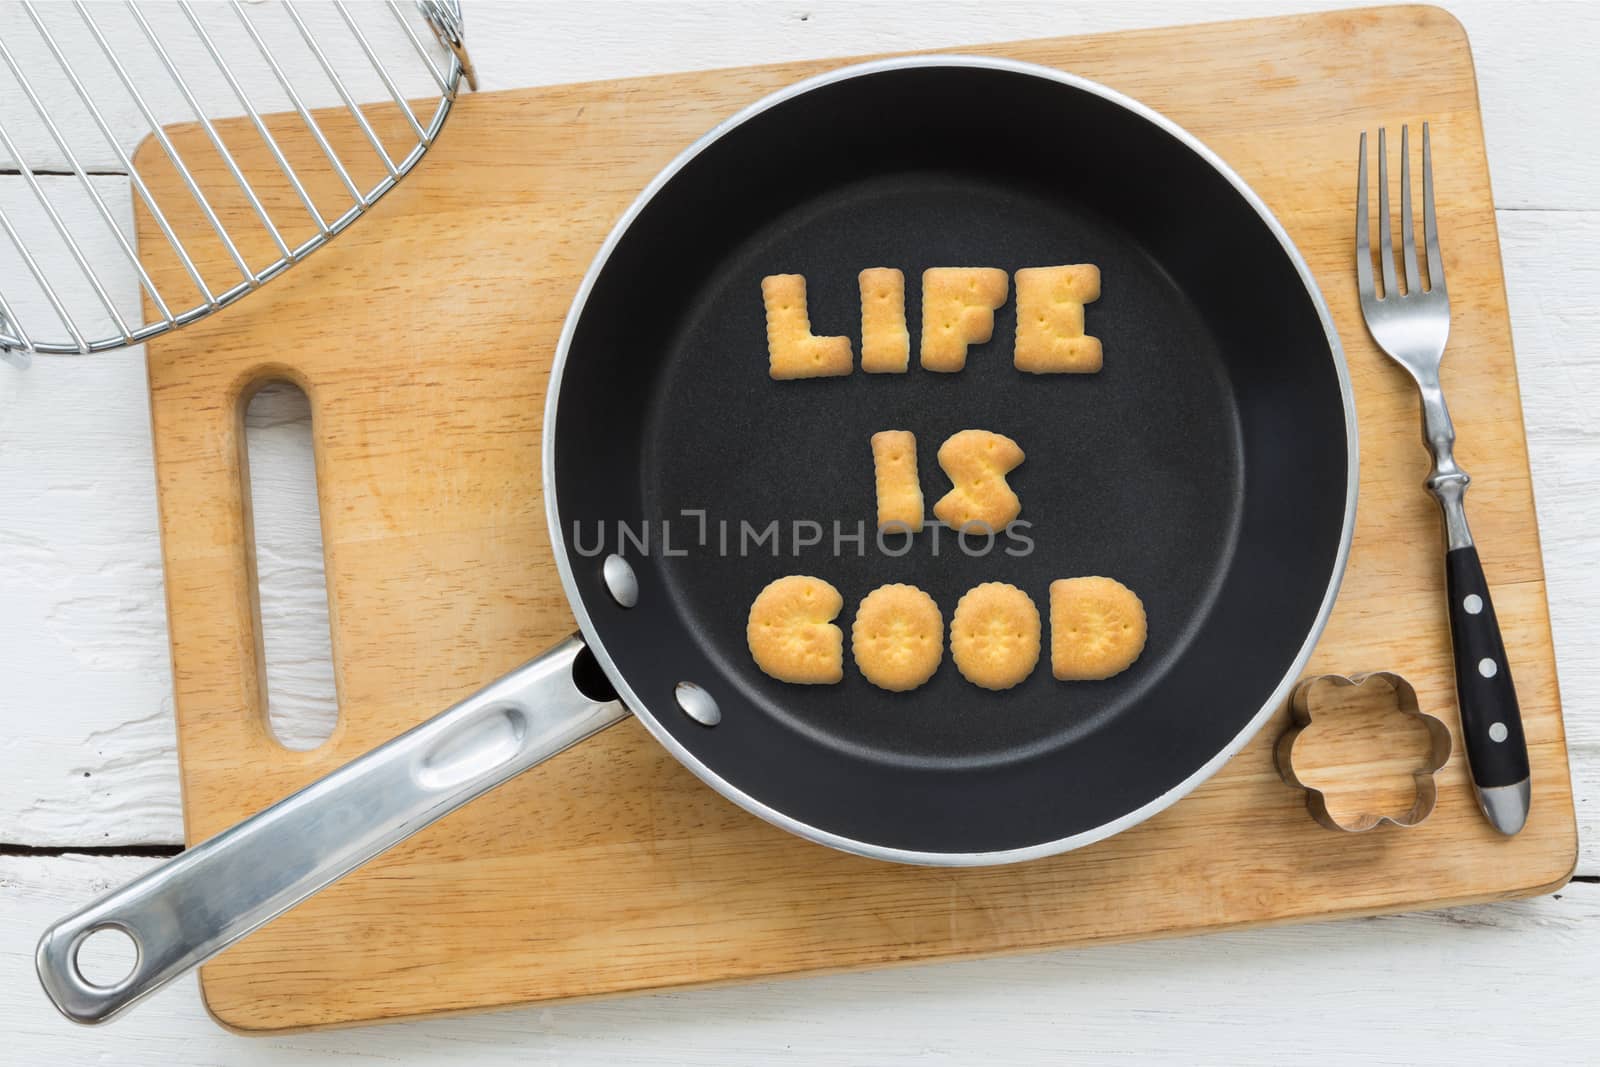 Letter cookies quote LIFE IS GOOD and kitchen utensils by vinnstock